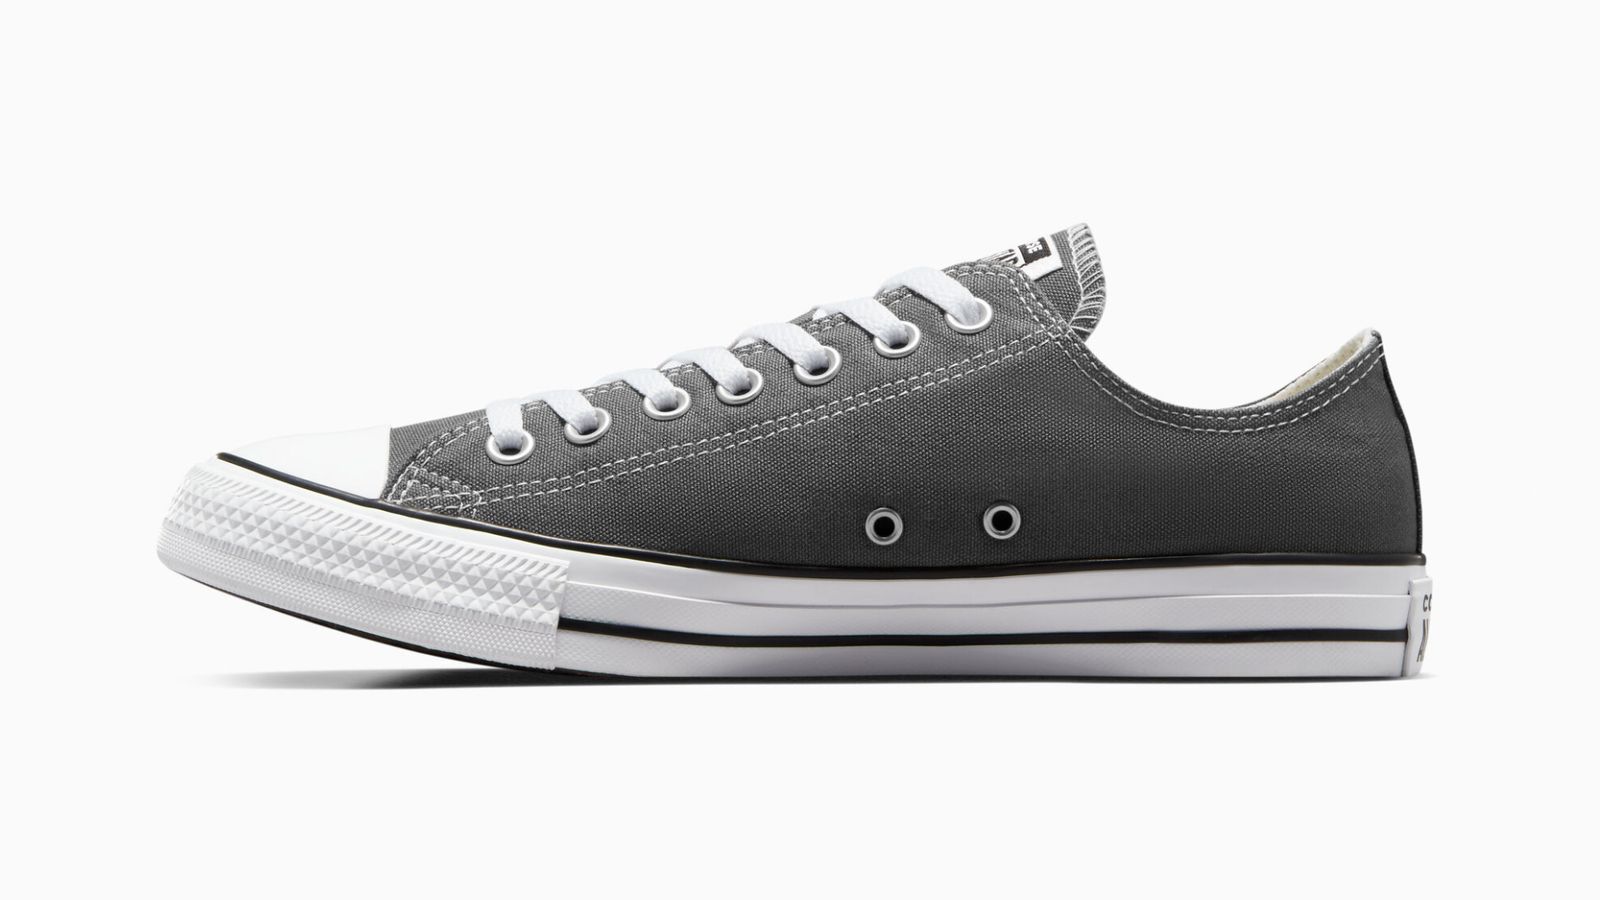 Converse Chuck Taylor All Star product image of a grey Converse low-top with a white and black sole.